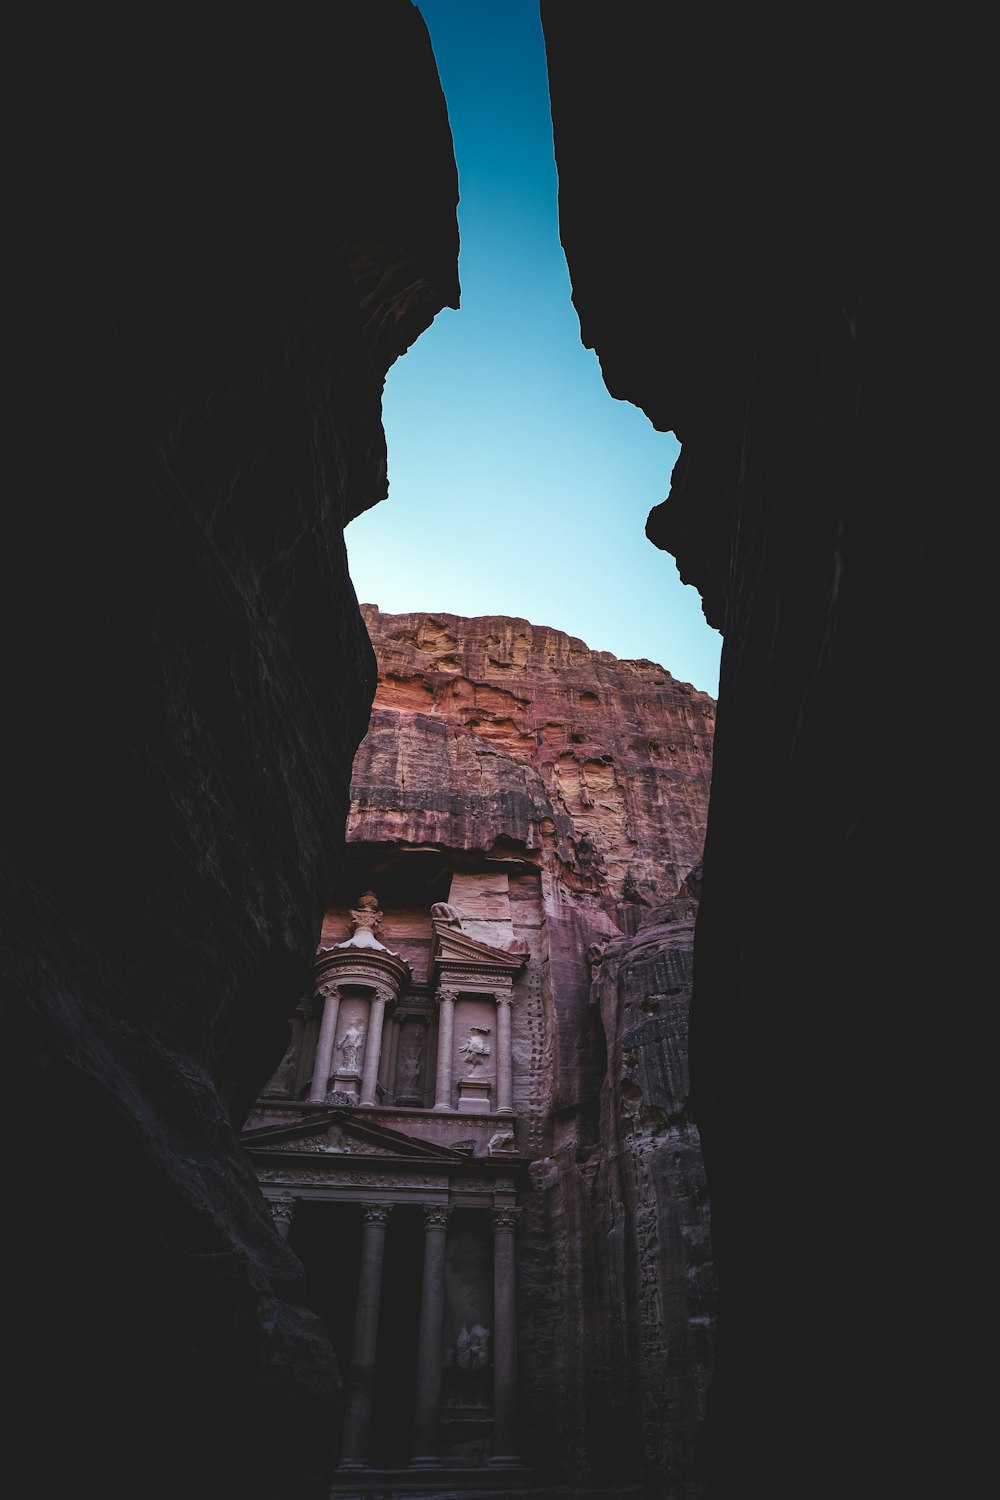 a view of a building through some rocks